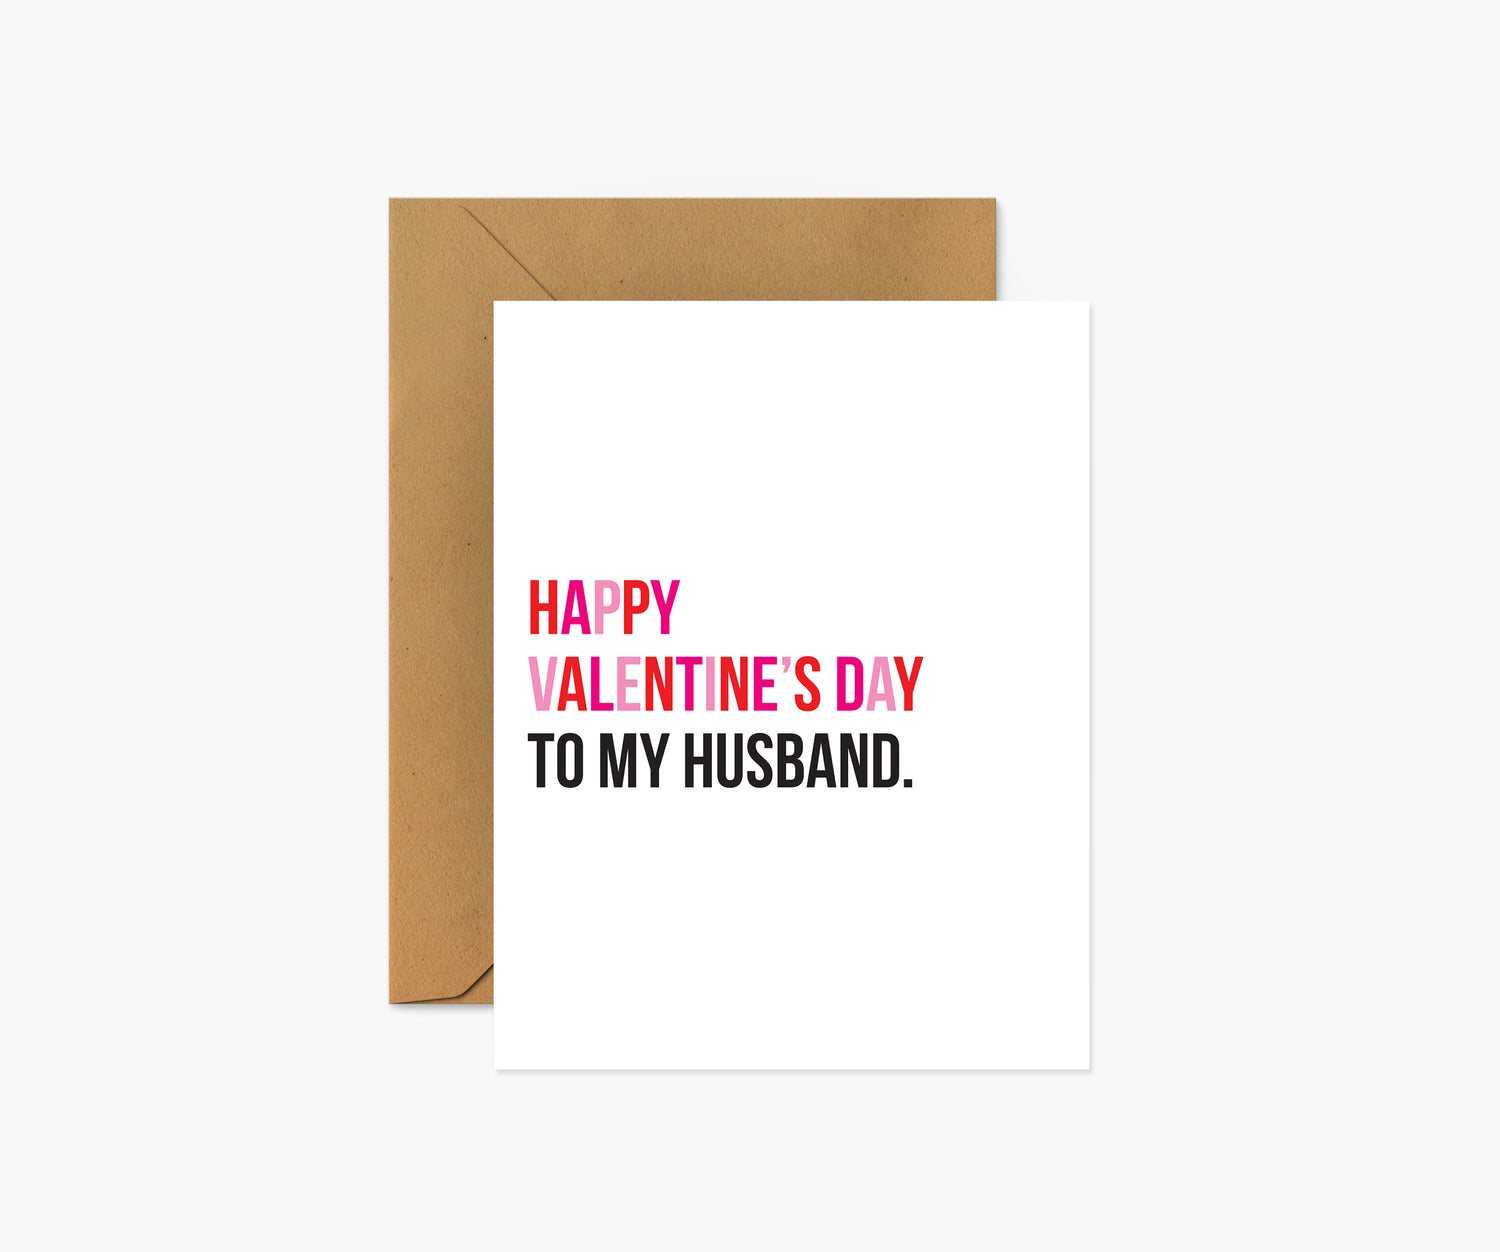 To My Husband - Valentine's Day Card | Footnotes Paper